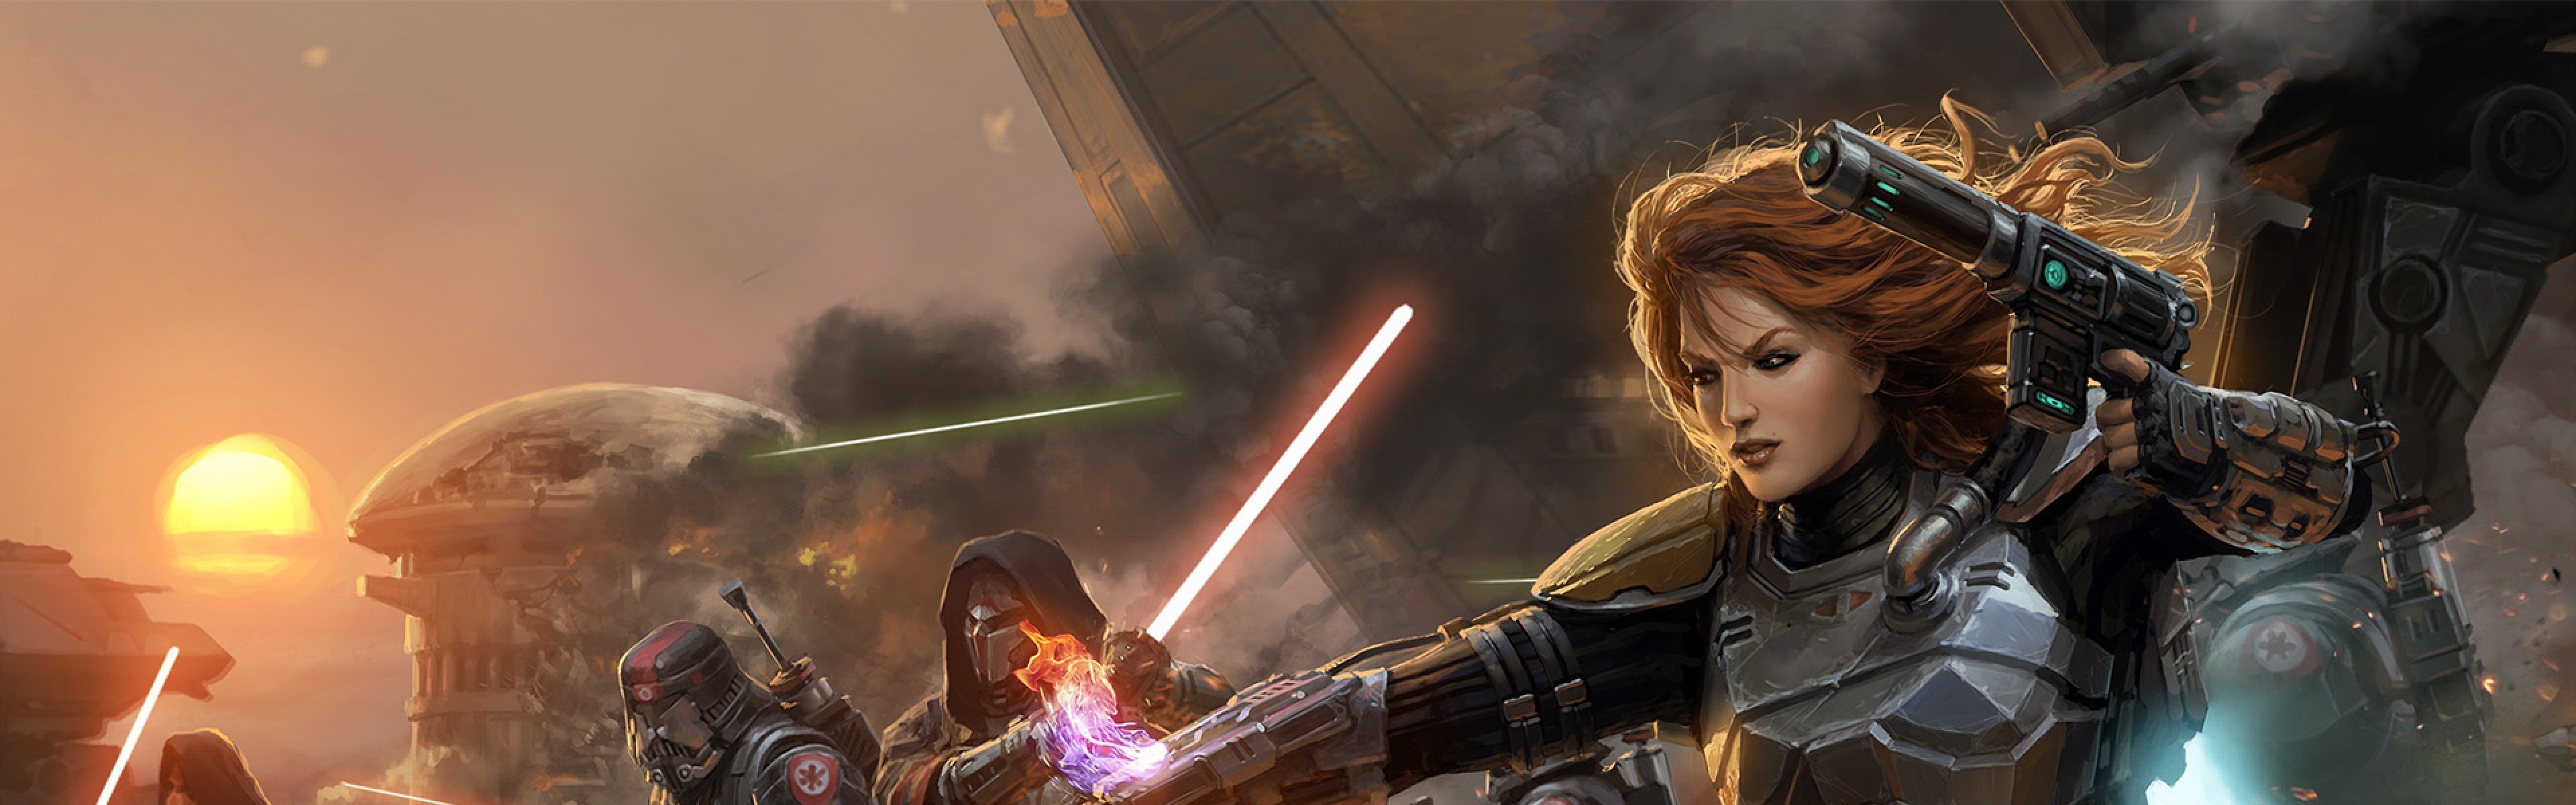 Wallpaper Star Wars The Old Republic Girl Lightsabers